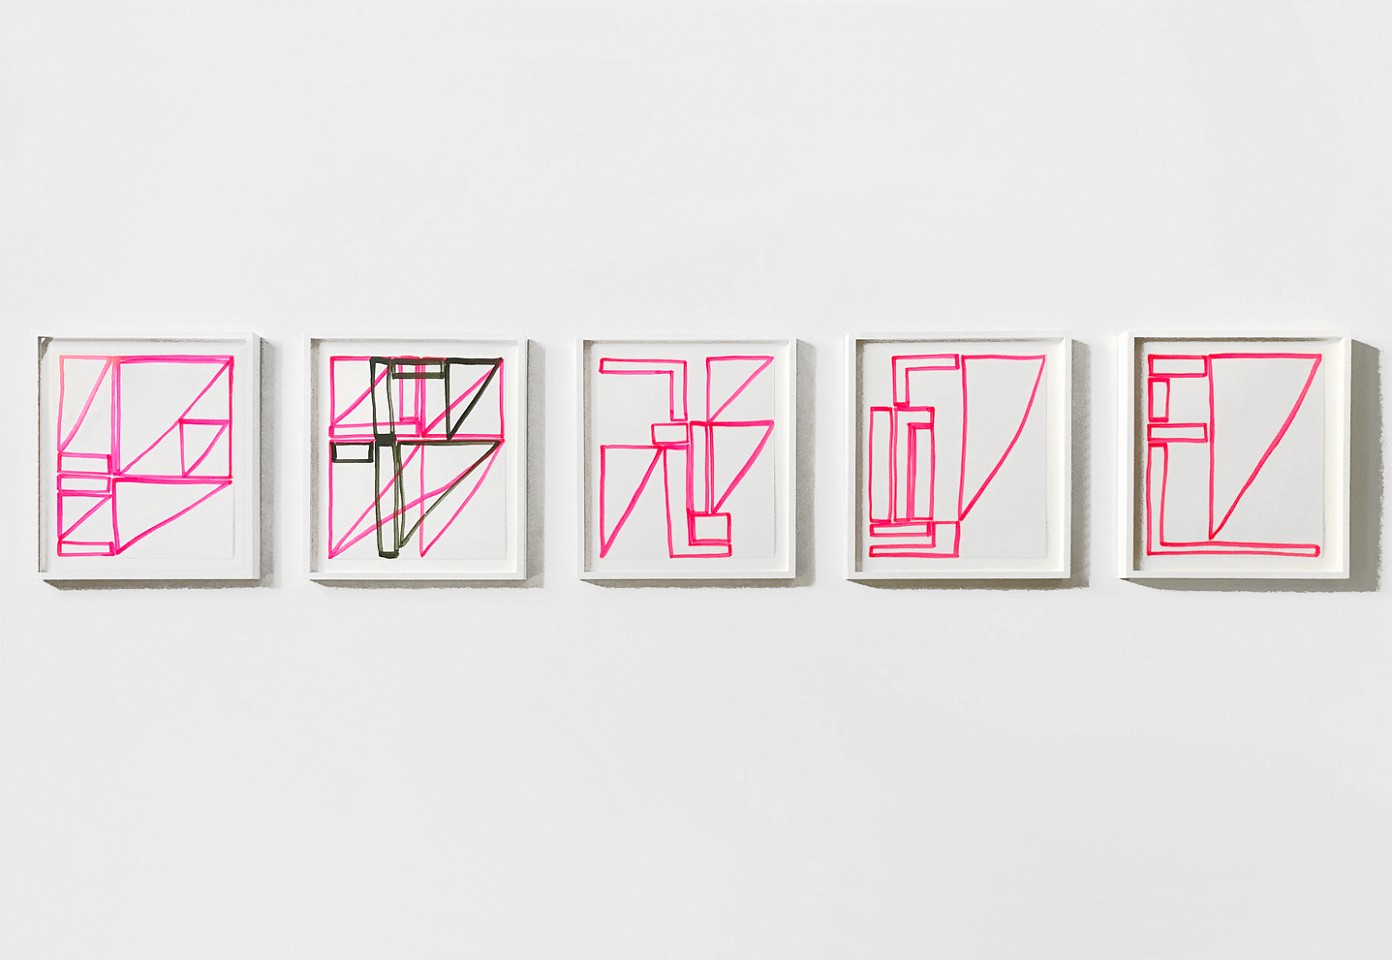 Agnes Barley
Untitled (Pink) Installation, 2019
11 x 9 1/4 inches paper / 13 3/8 x 11 3/4 inches framed each